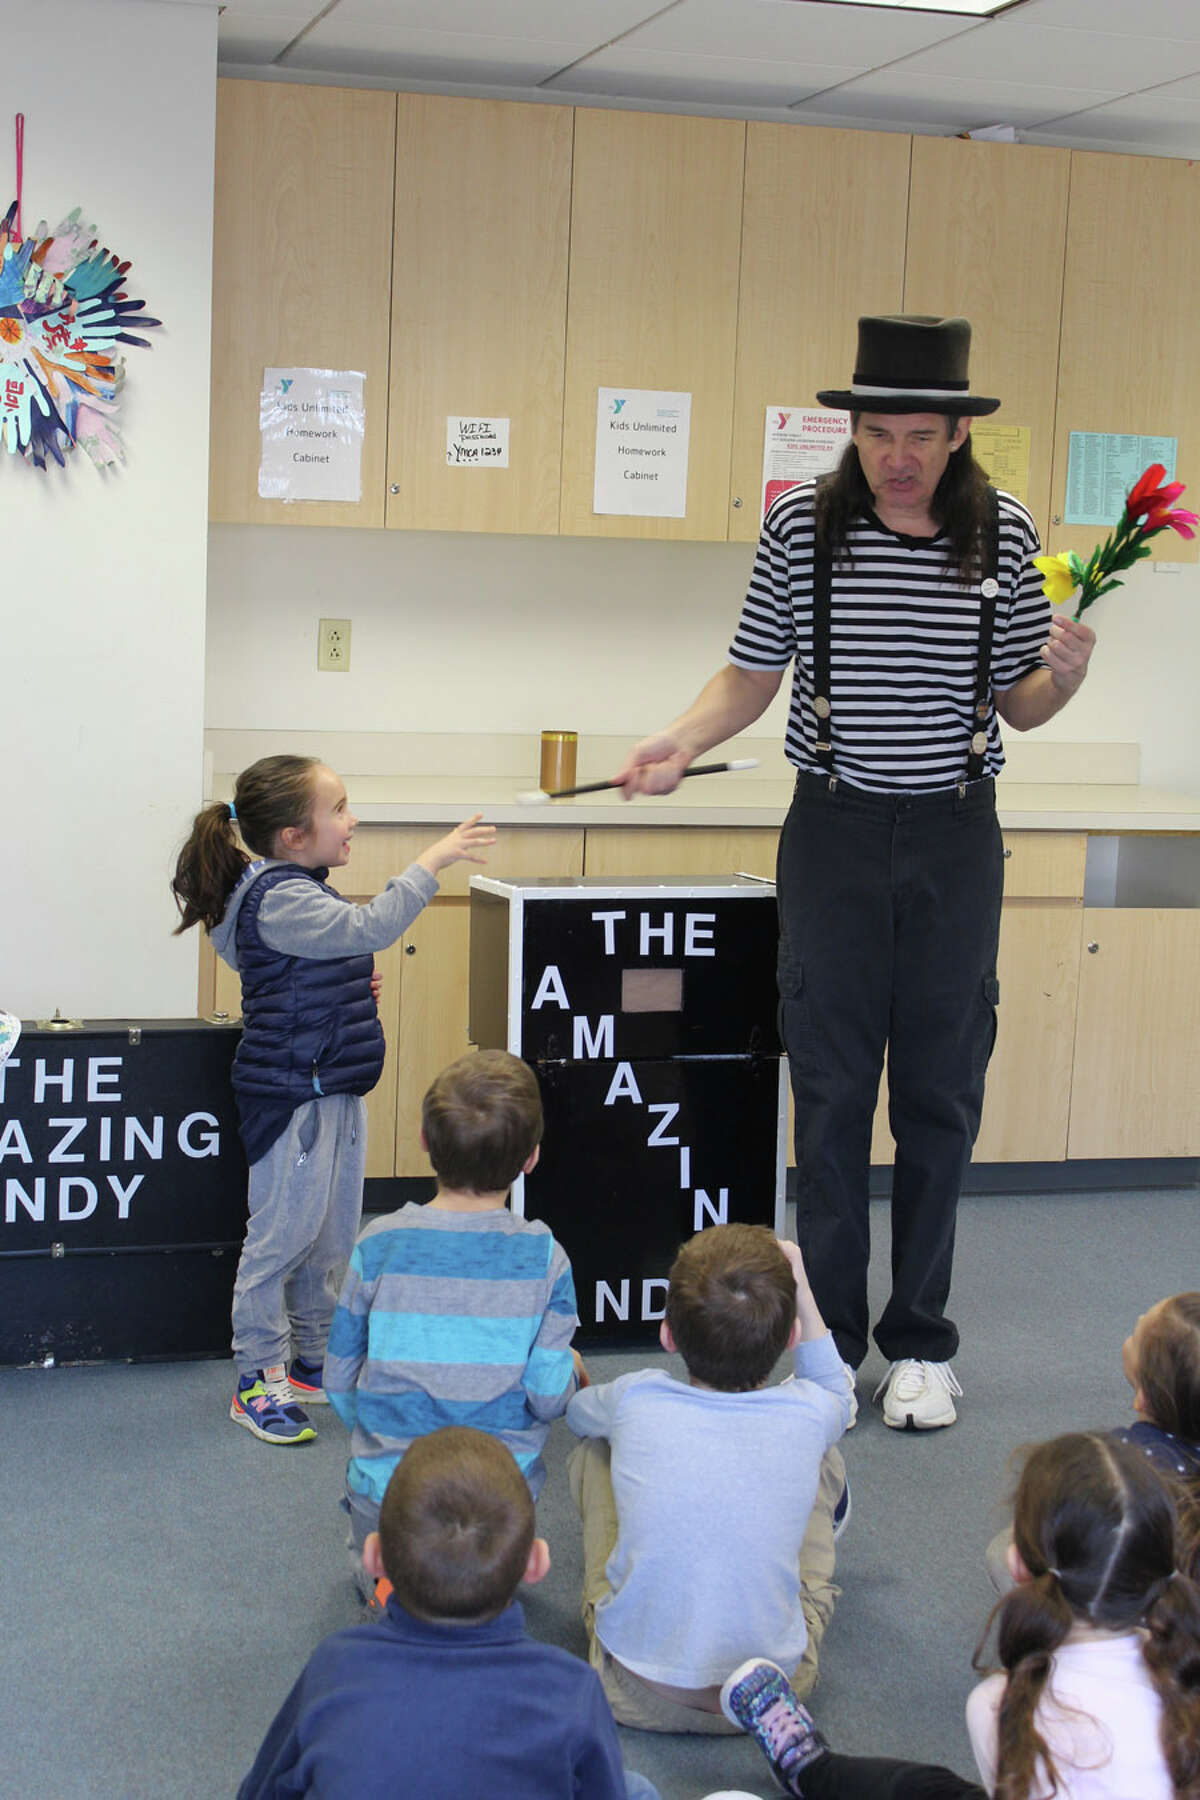 Vacation Camp at the New Canaan YMCA was well attended by school children who enjoyed fun activities including a visit from The Amazing Andy and his furry friend, Silly Willy the rabbit, to do magic tricks.